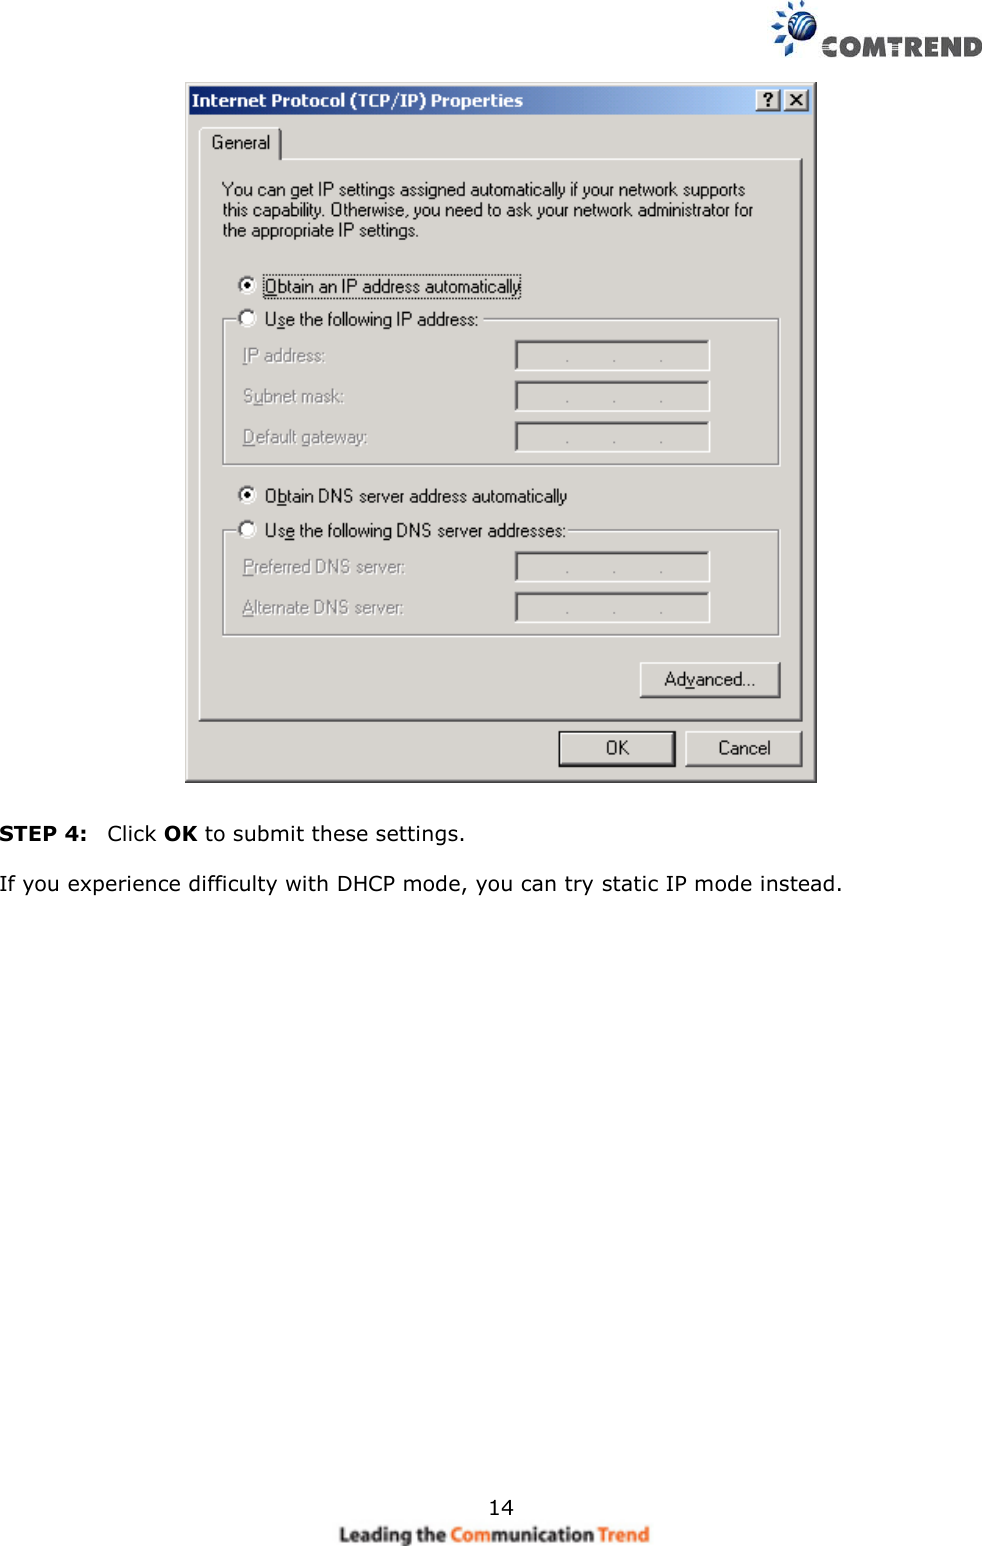     14   STEP 4:   Click OK to submit these settings.  If you experience difficulty with DHCP mode, you can try static IP mode instead. 